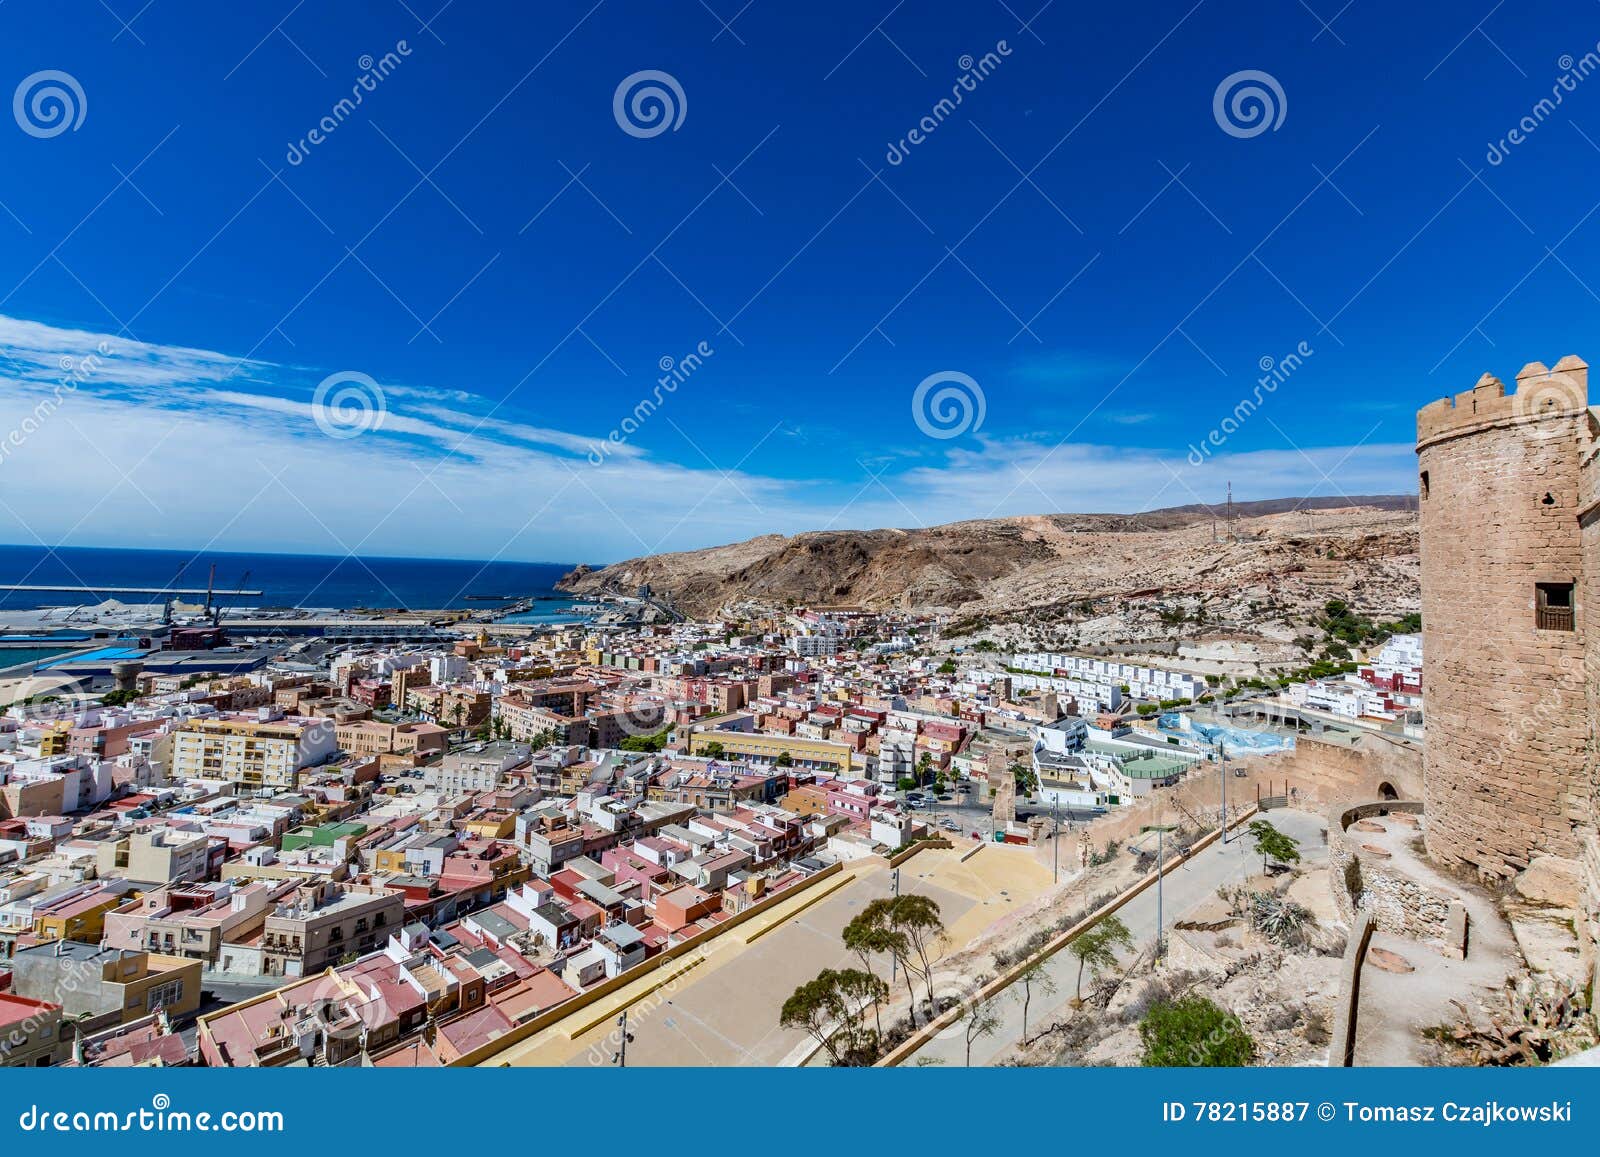 panoramic view of almeria old town and harbour